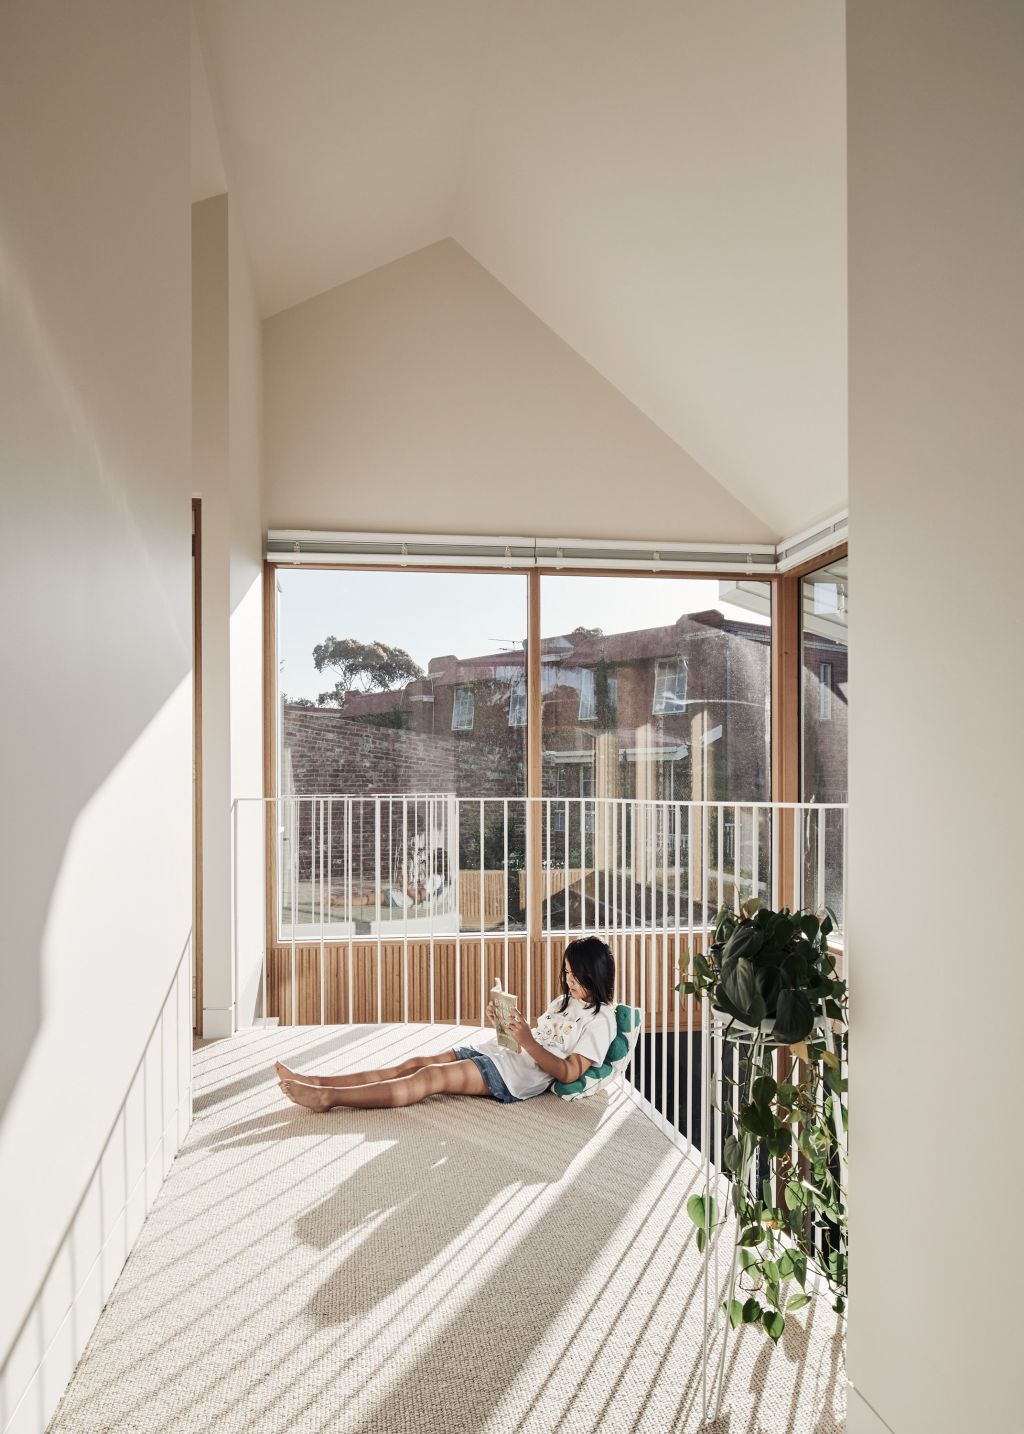 A sunny hangout space inside the house. Photo: Peter Bennetts